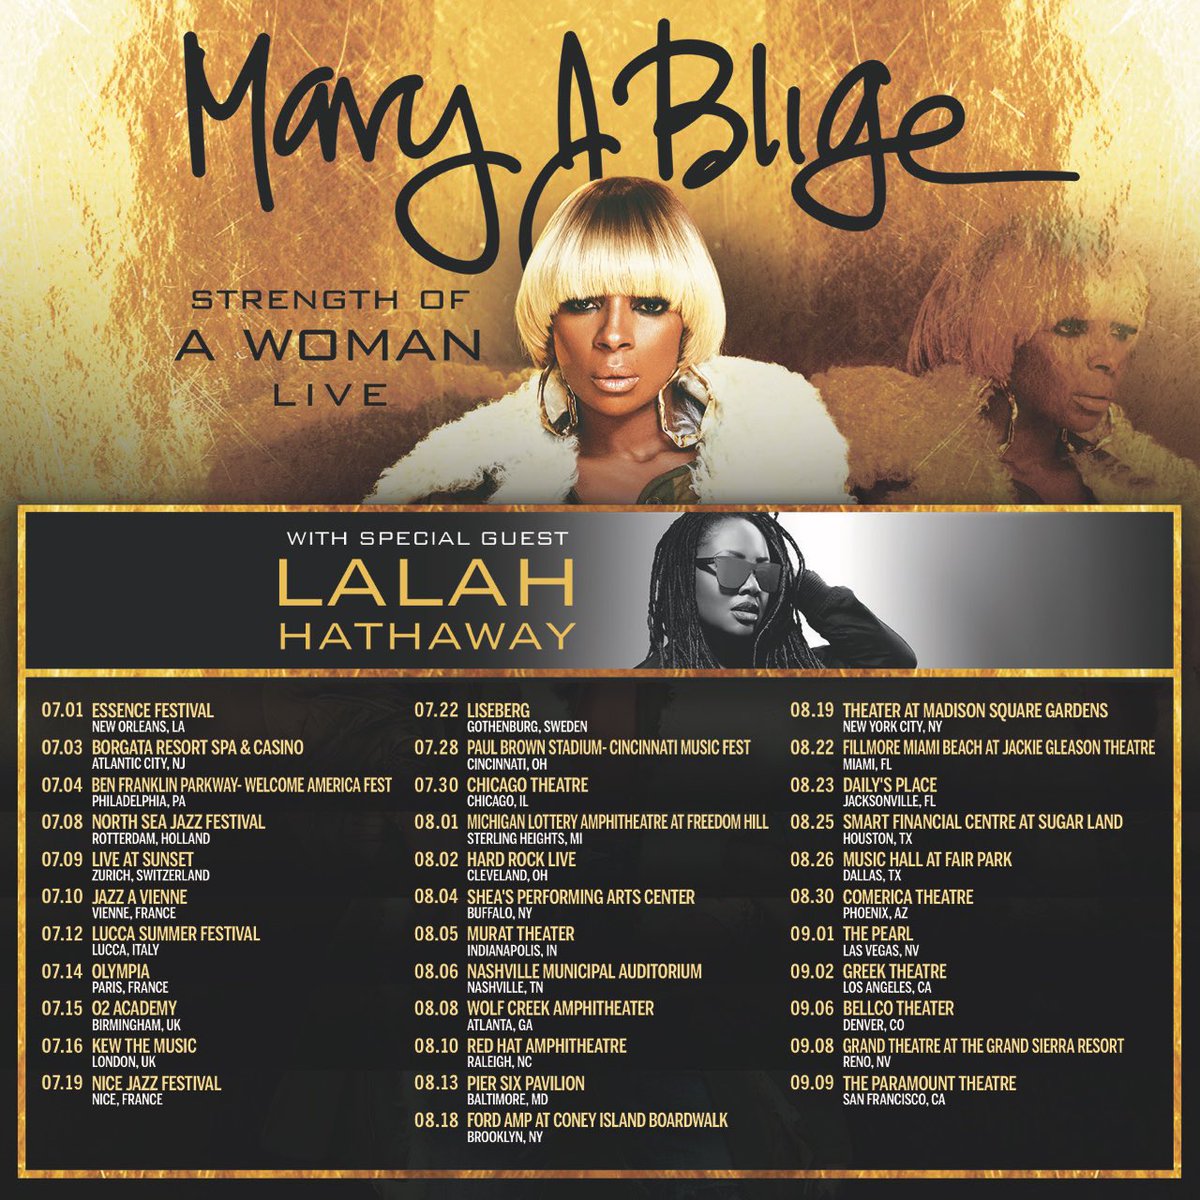 Mary J. Blige Announces "Strength of a Woman" Tour with Lalah Hathaway